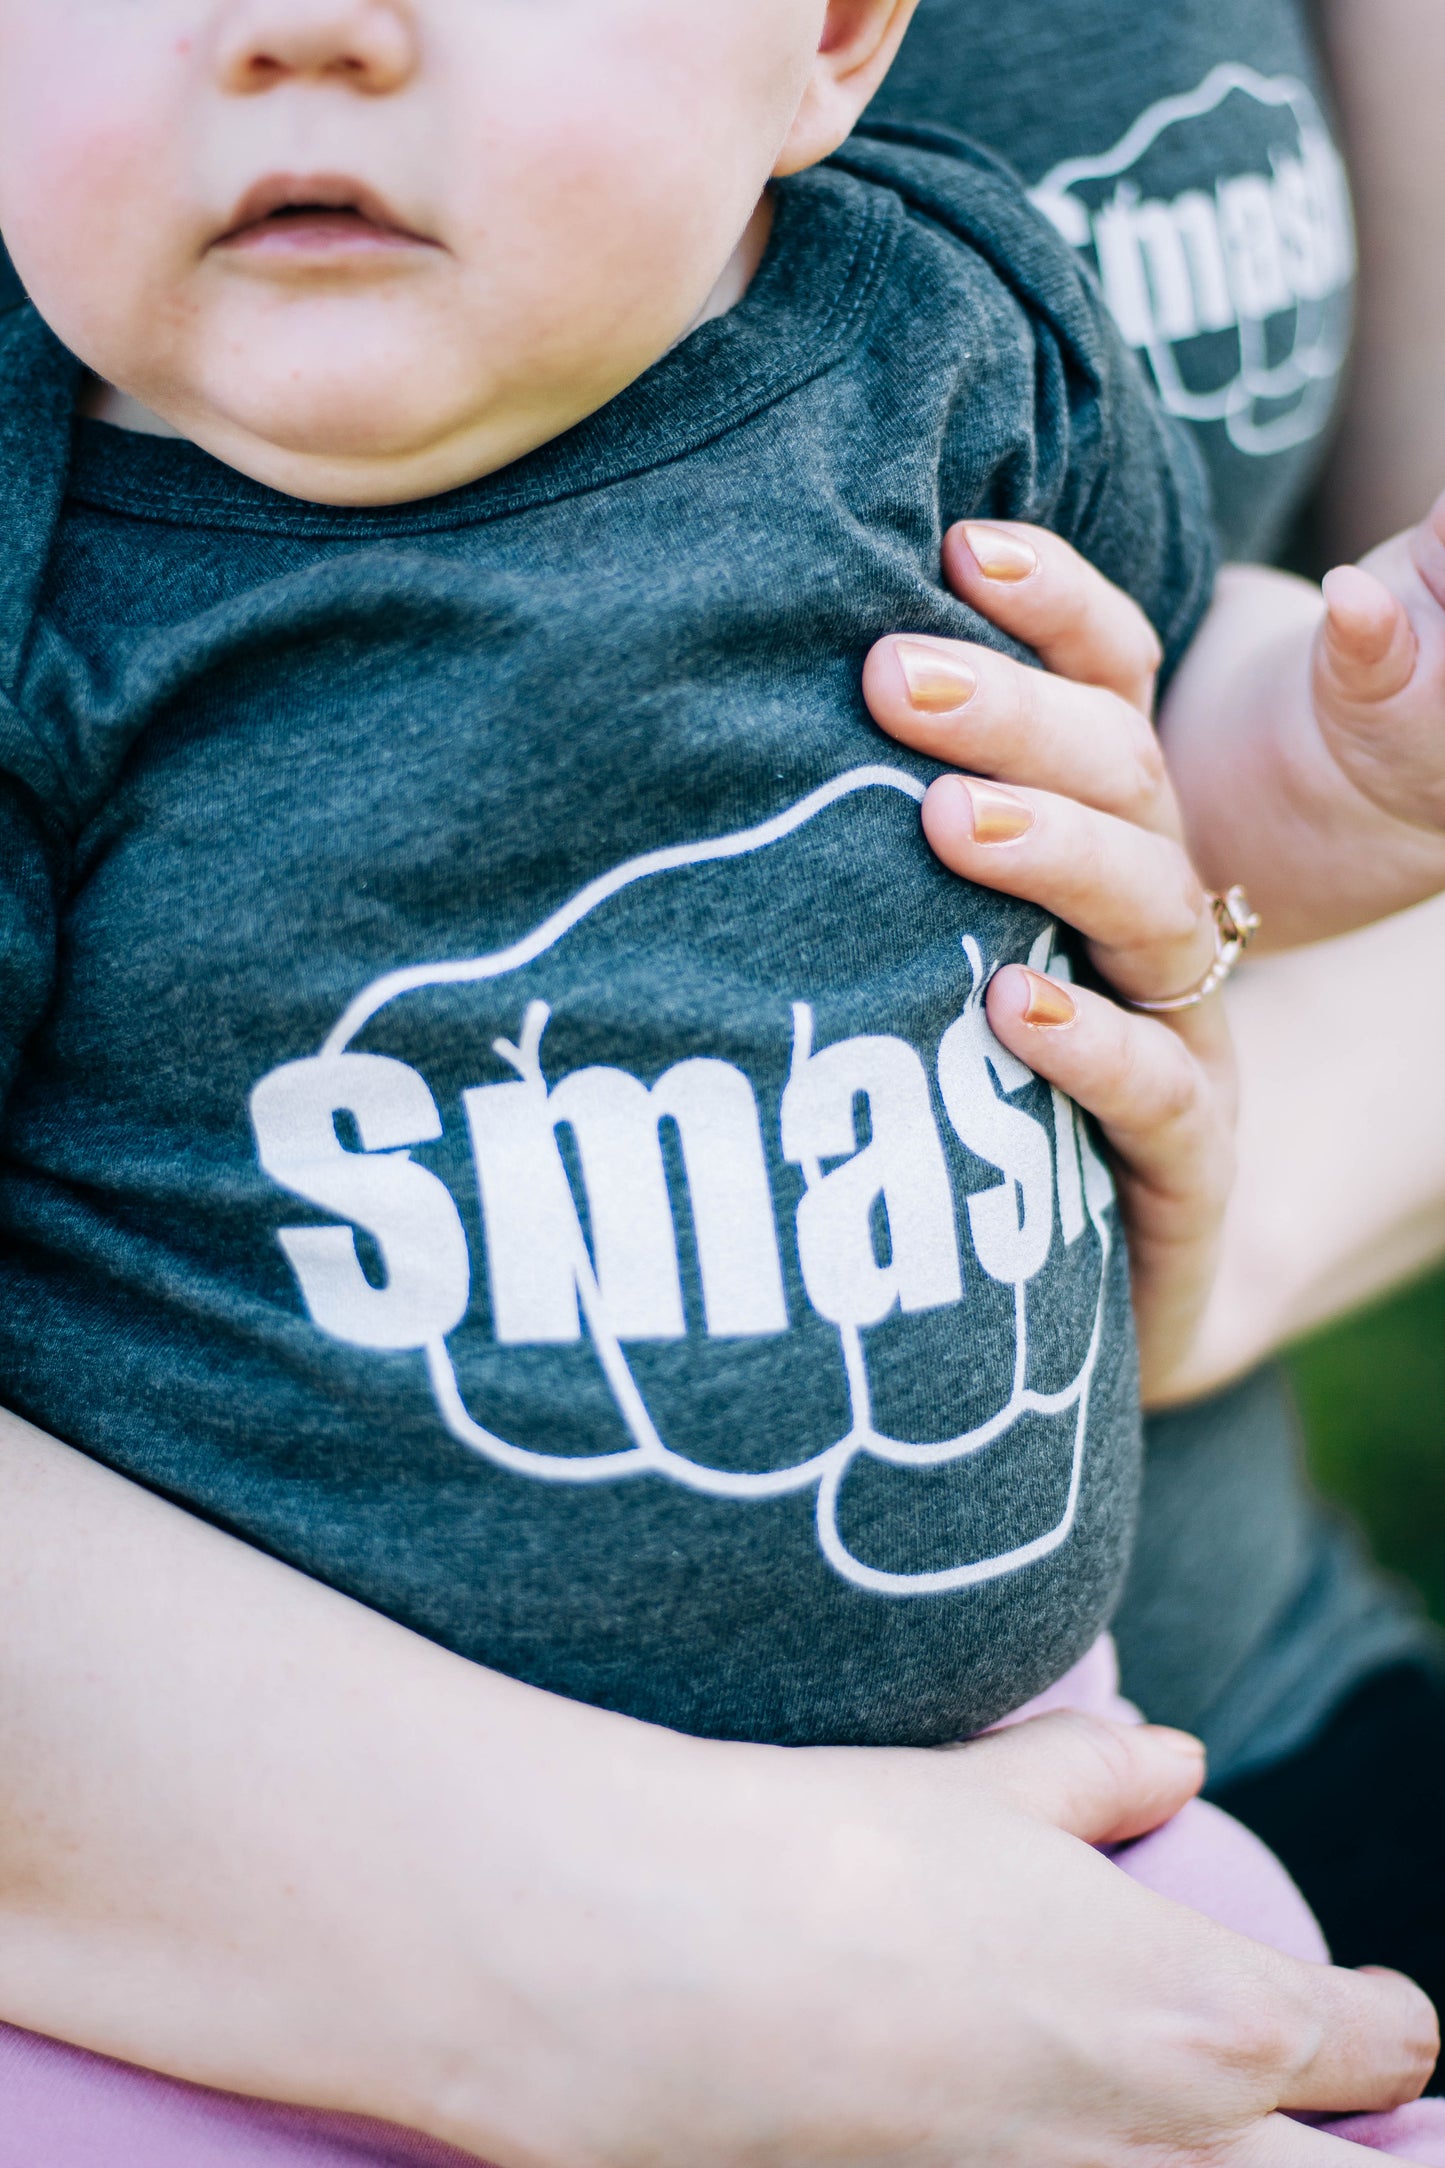 Smash Fist Baby short sleeve one piece charcoal black zoom in